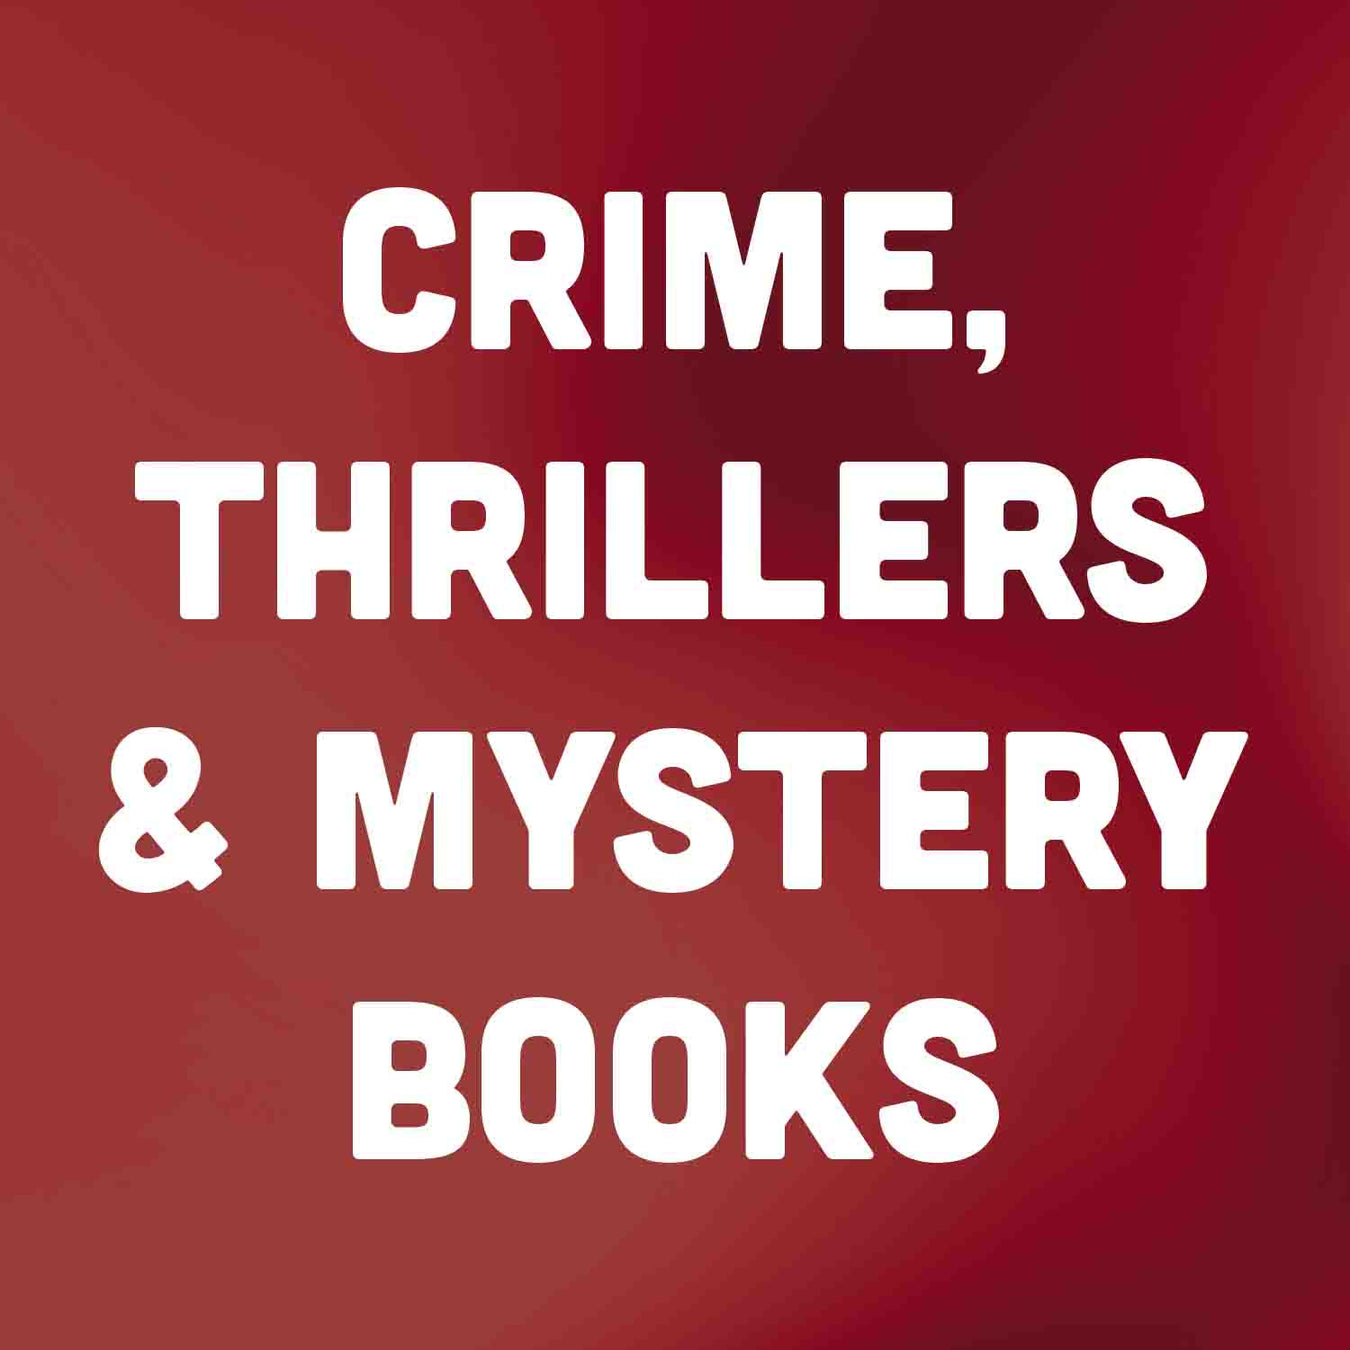 Crime, Thrillers & Mystery Books